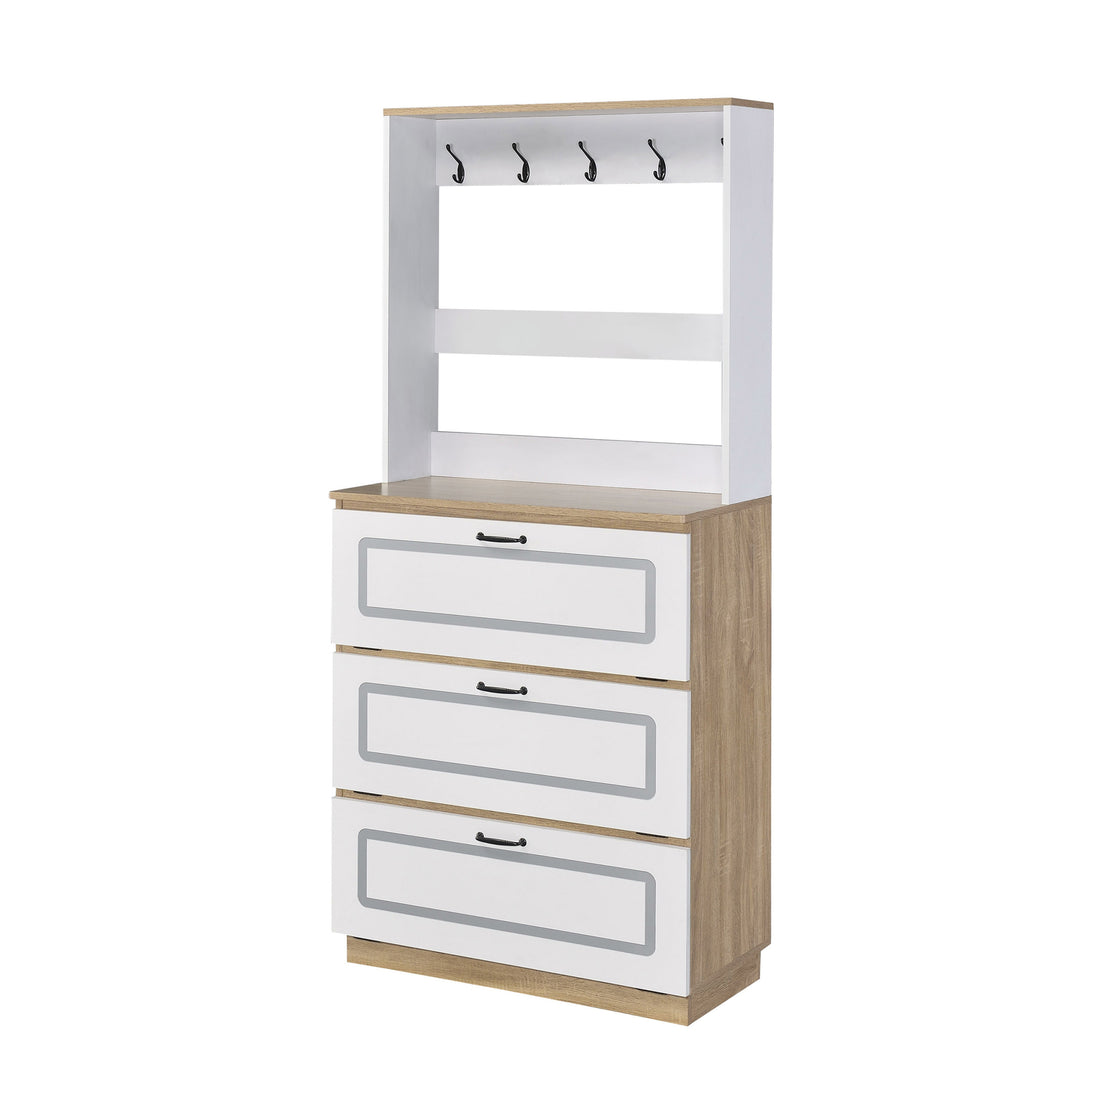 Light Oak And White Shoe Cabinet With Drop Down